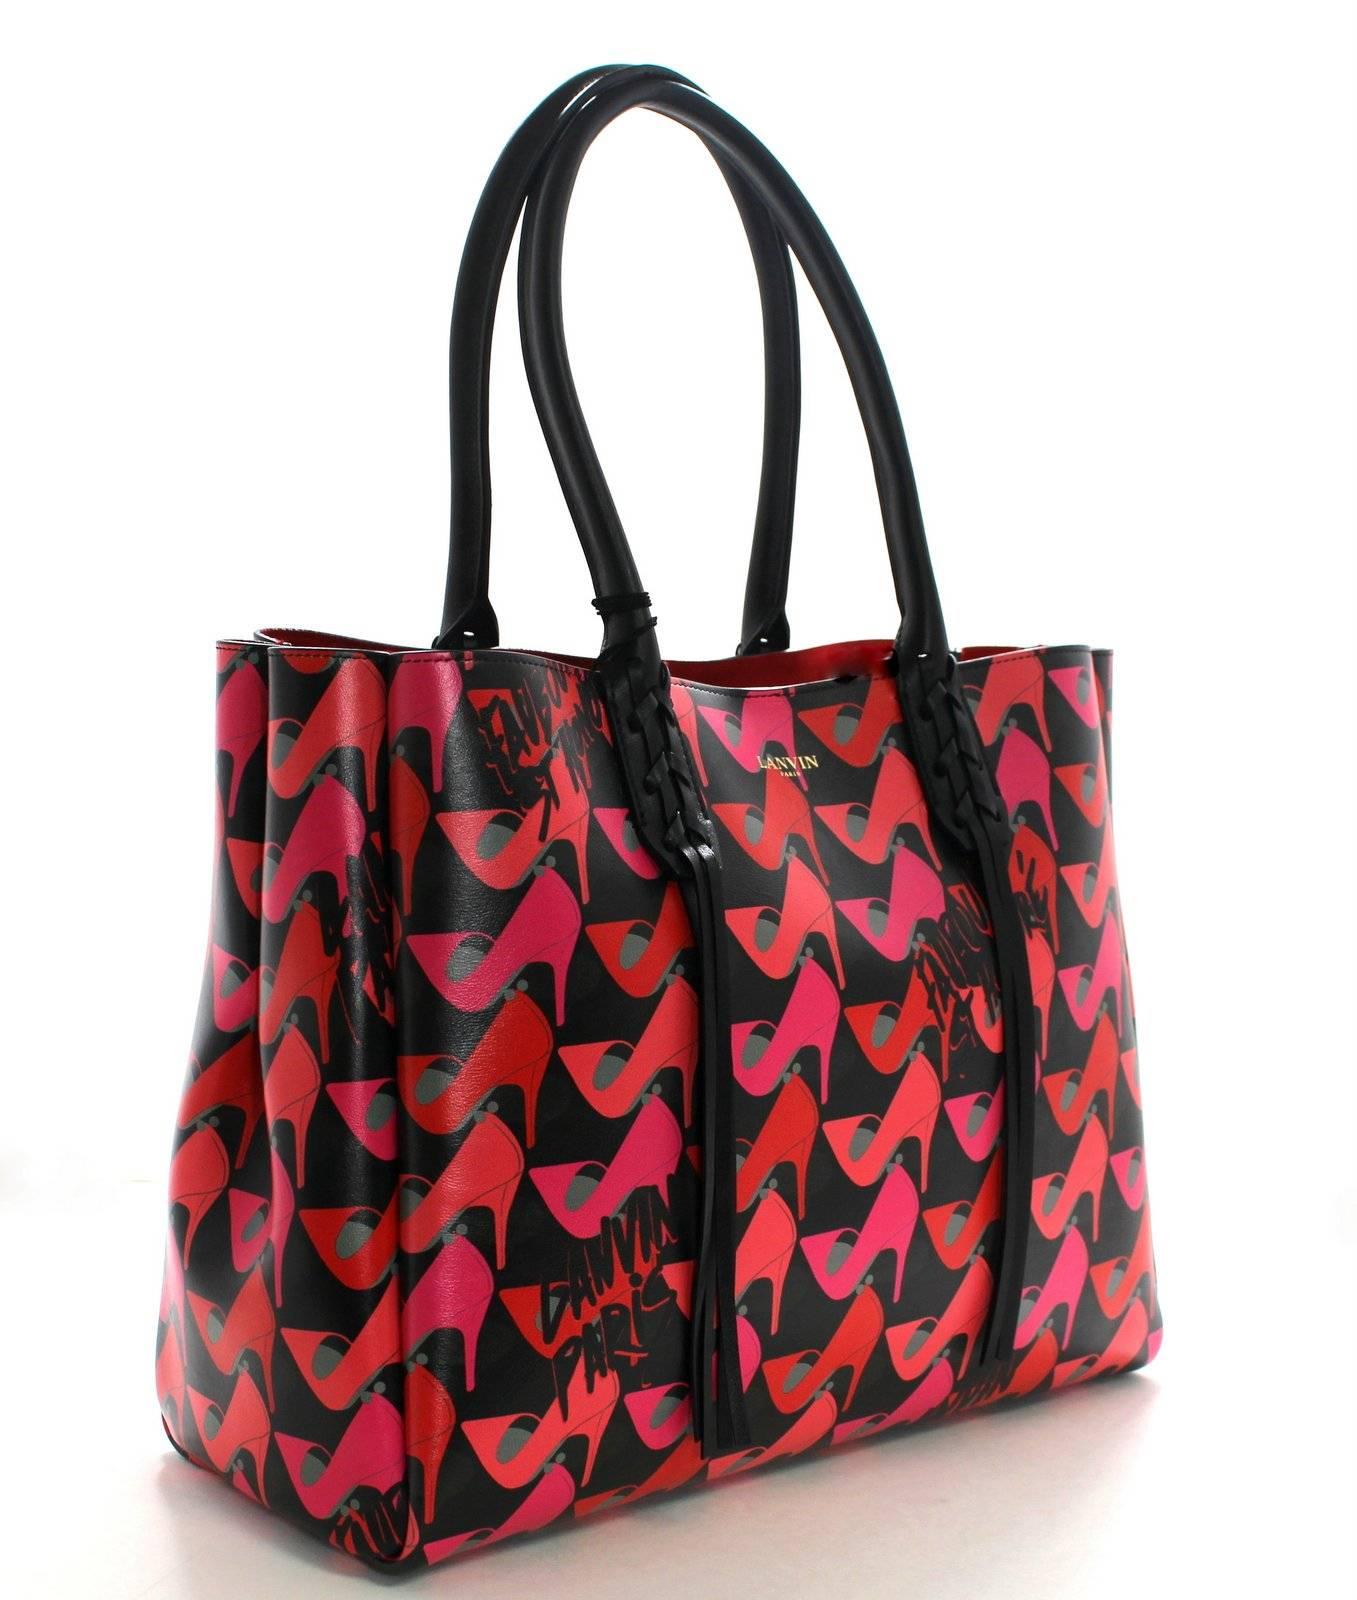 Lanvin Black and Pink Leather Shoe Print Tote- NEW; Retail $1,850.00
Stunning and unique graphic print in bold colors.  So much more interesting than basic black!!
Black calf leather tote is covered with pink and red pumps in a striking graphic